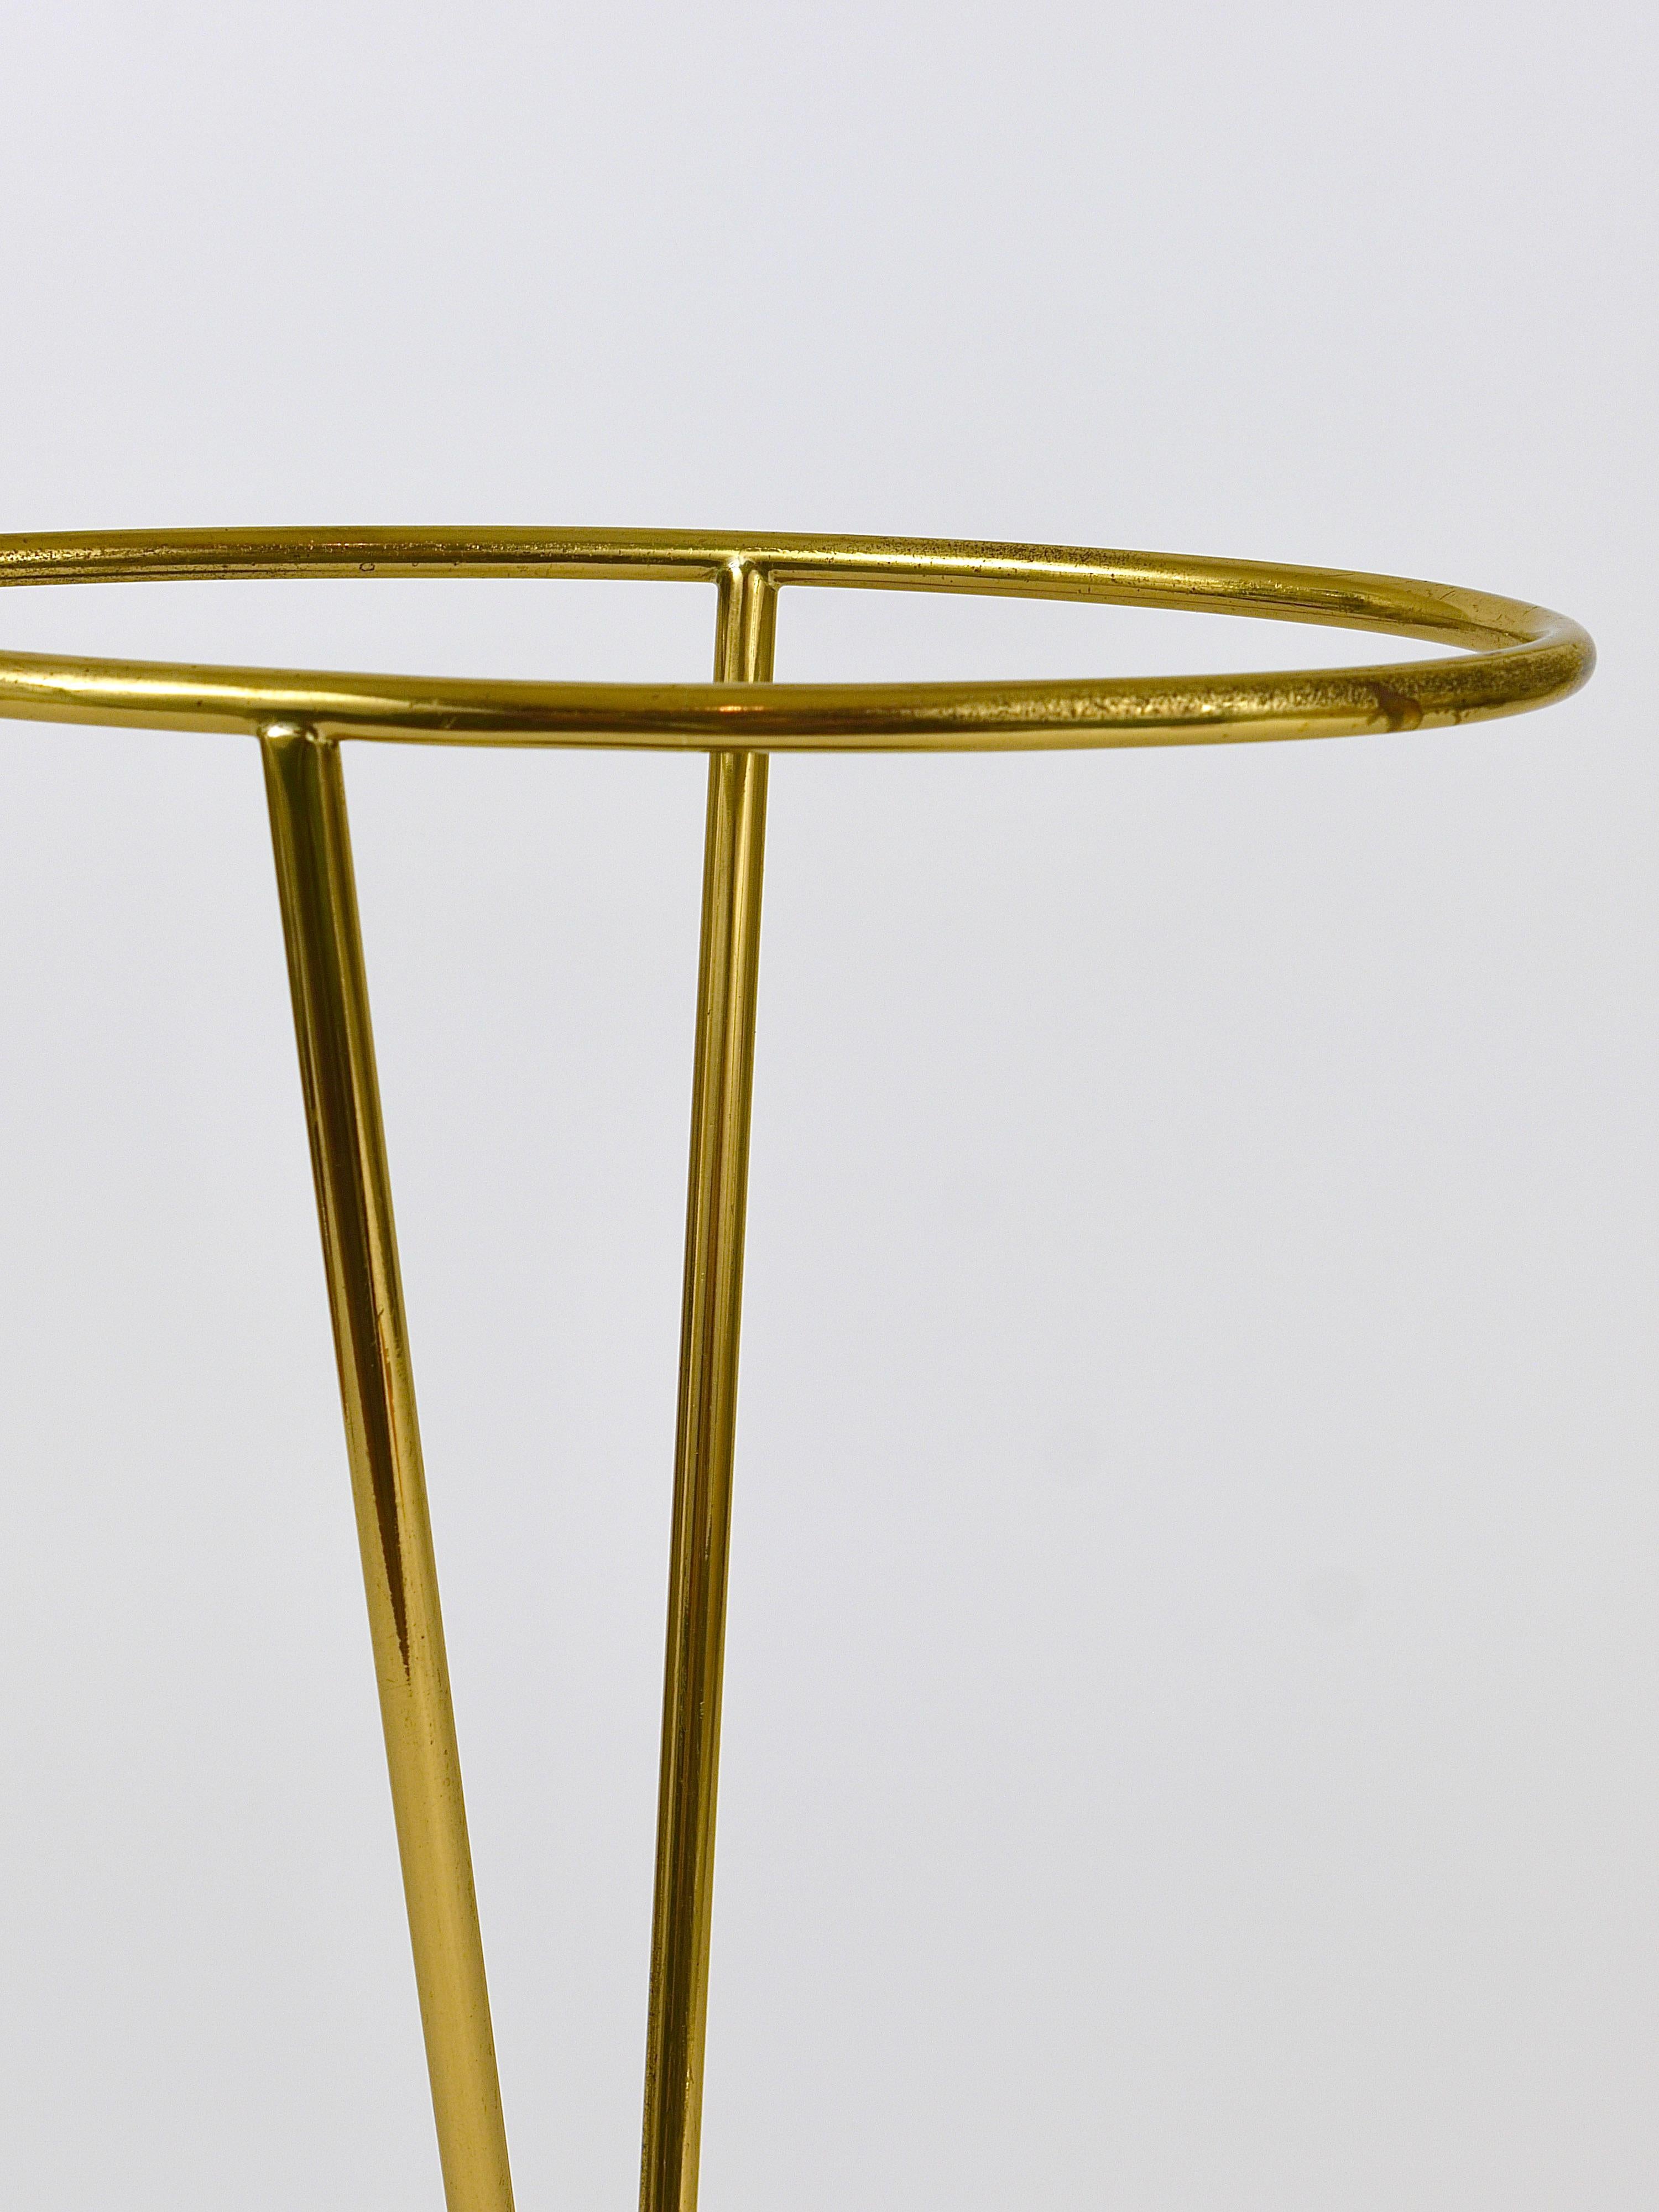 Carl Auböck Mid-Century Brass and Cast Iron Umbrella Stand, Austria, 1950s For Sale 9